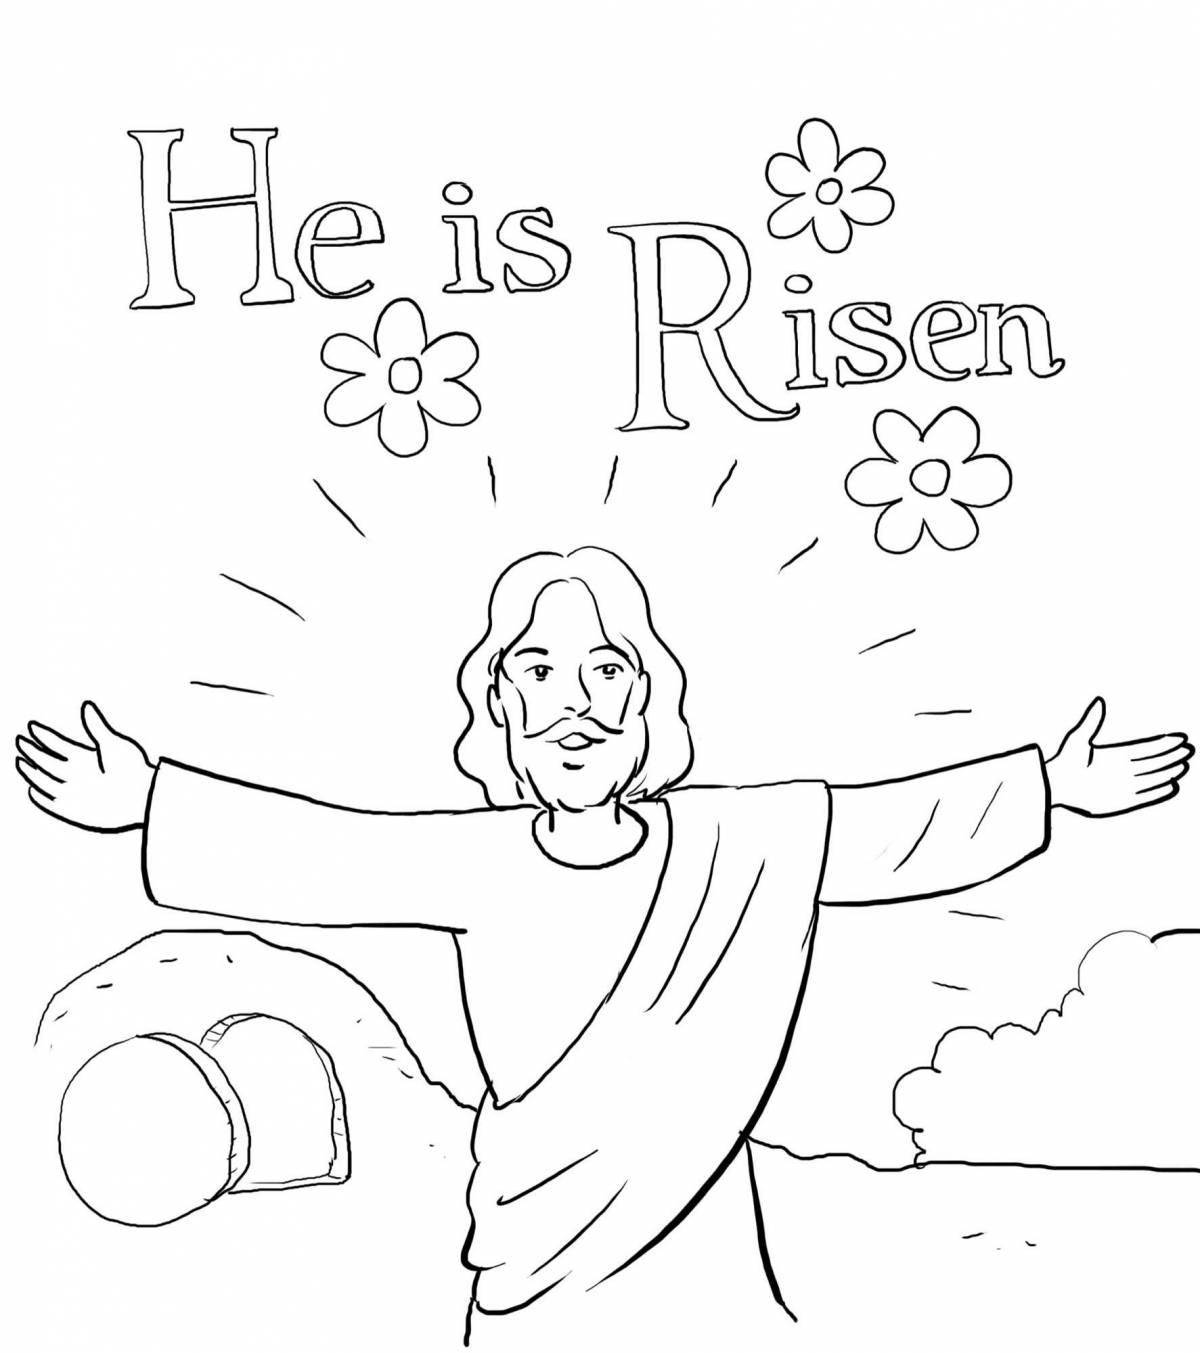 Colorfully divine jesus christ coloring book